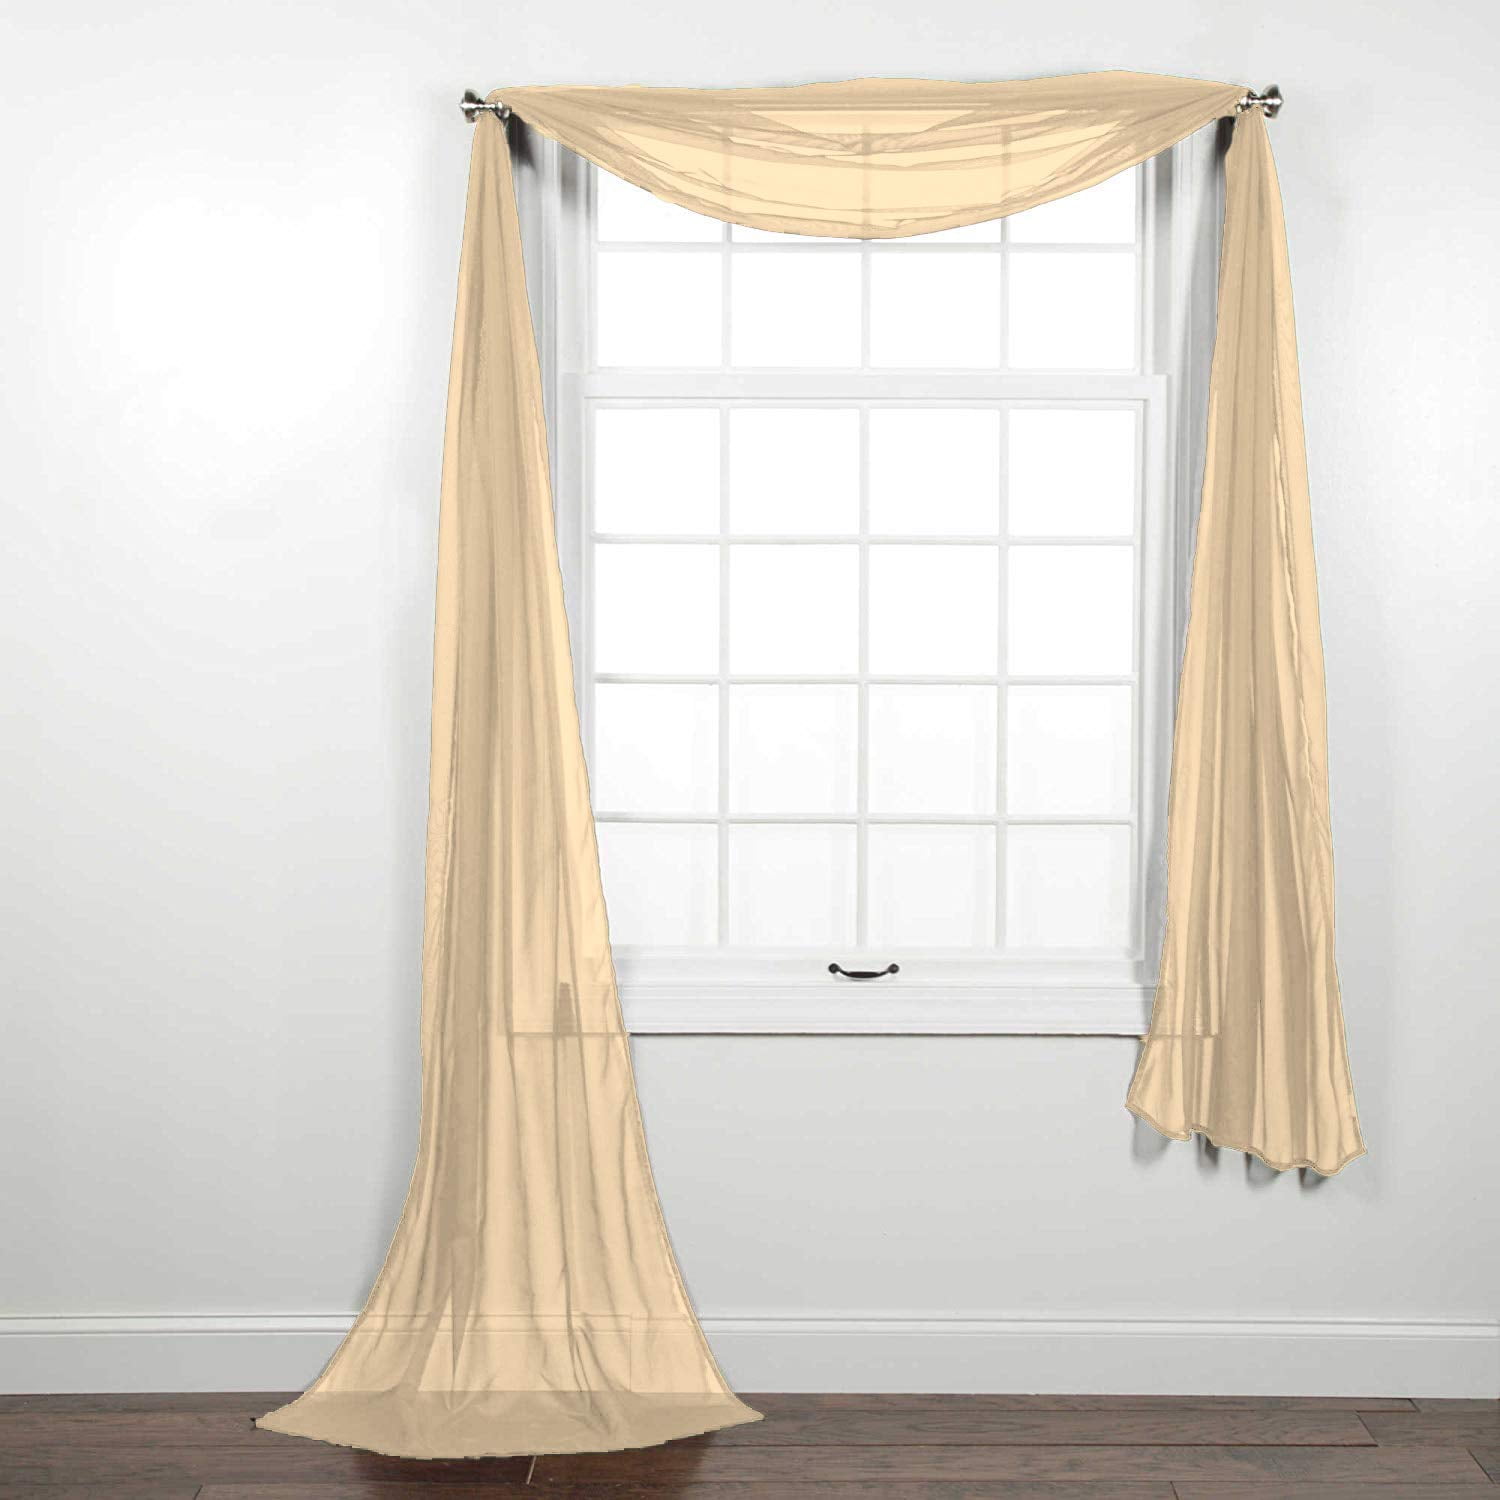 Details about   Stylemaster Sheer Drape 6-Yard Window Scarf Waterfall Top Treatment 40 x 216 NEW 